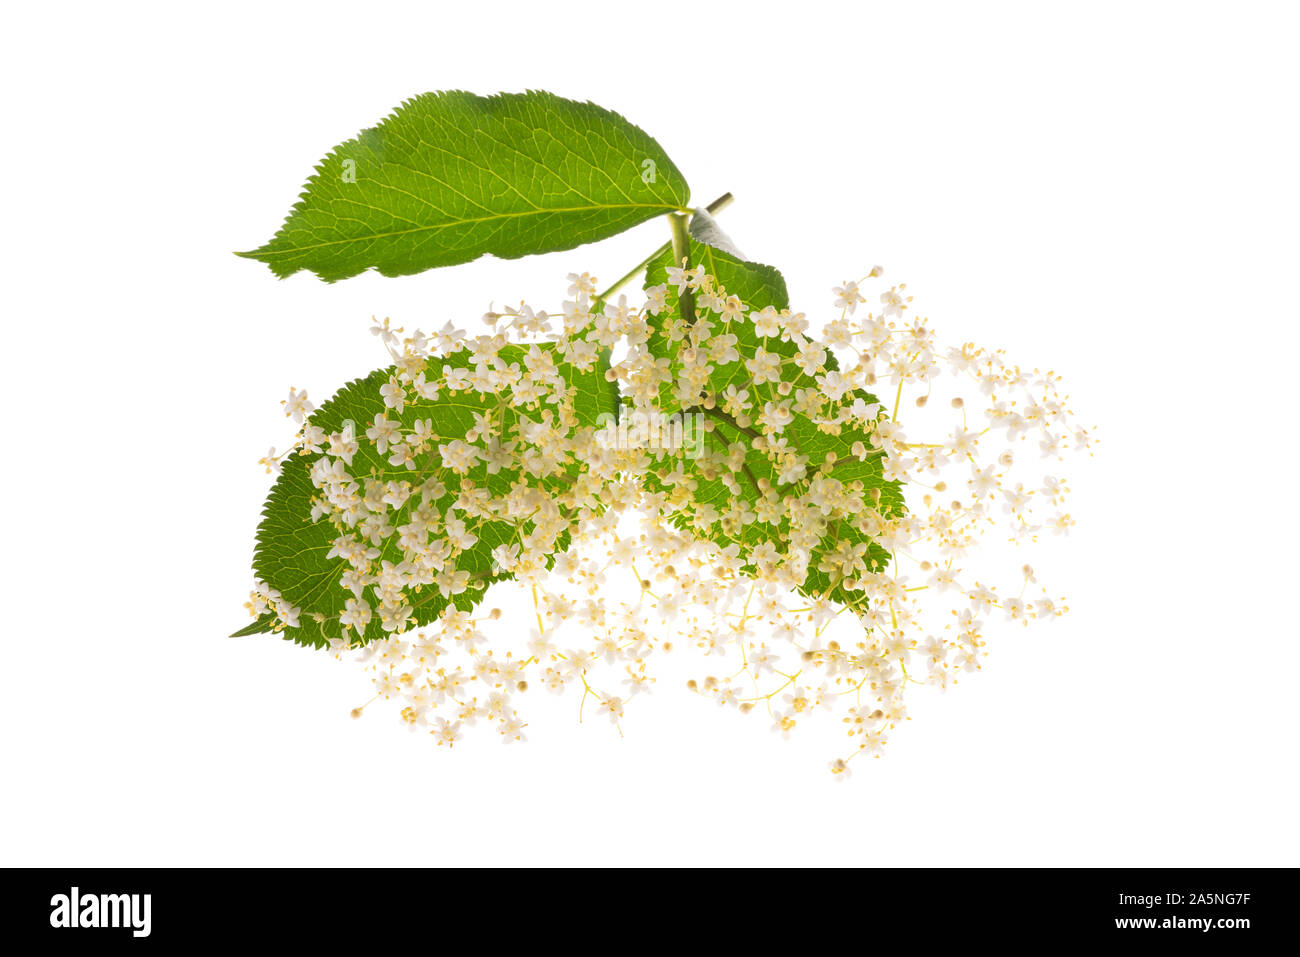 Elderberry flowers isolated on a white background Stock Photo